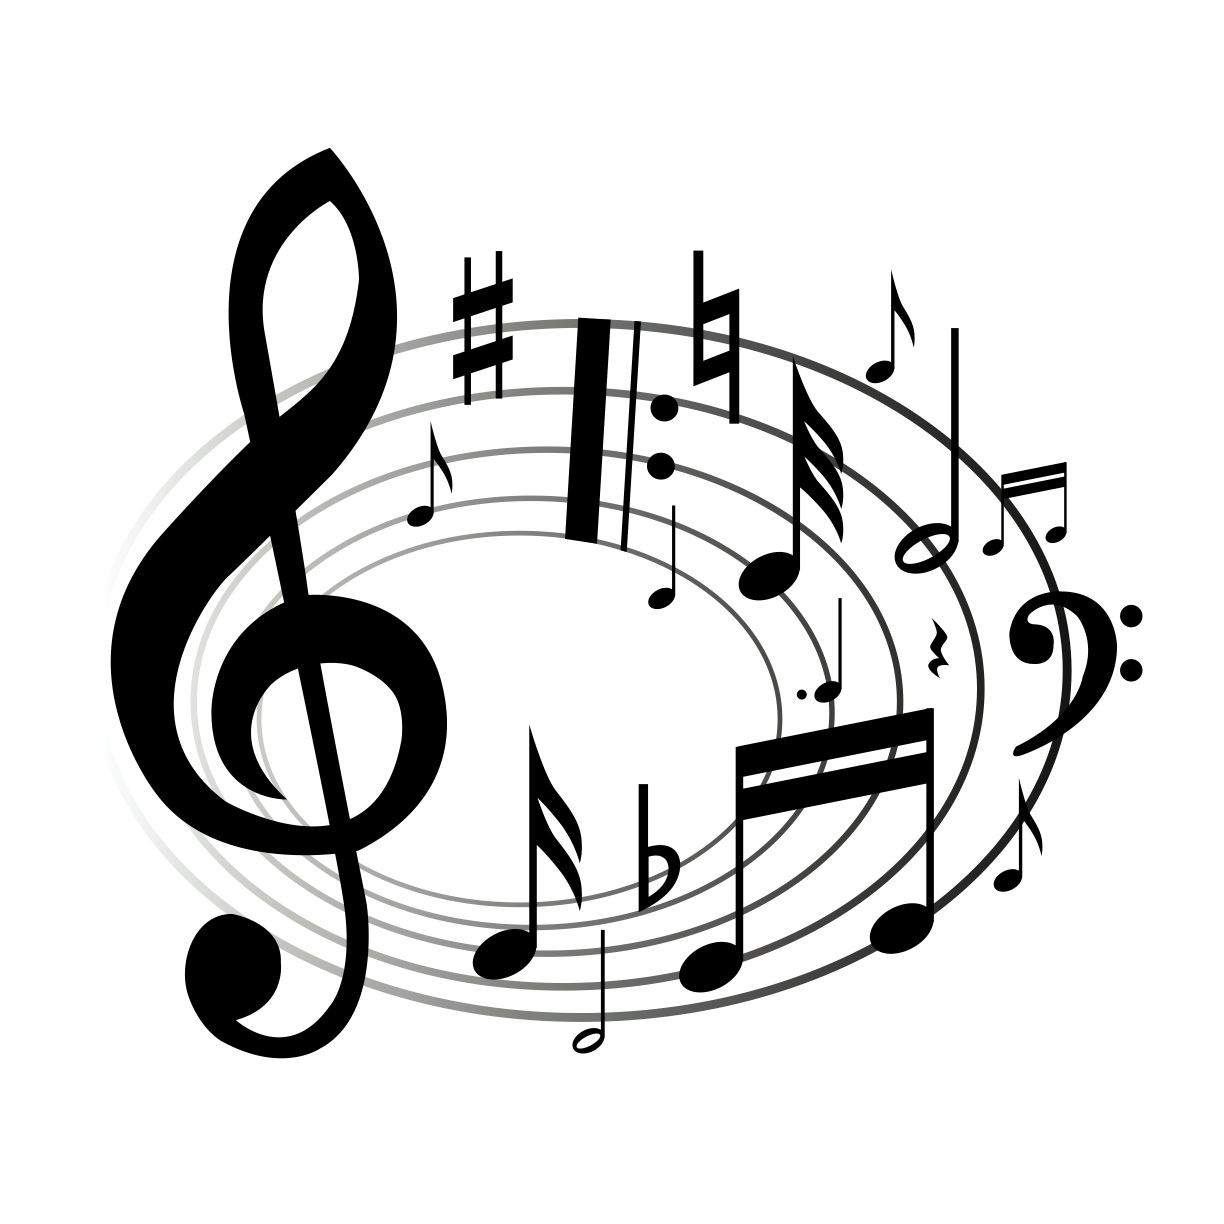 Drawn Music Notes - ClipArt Best